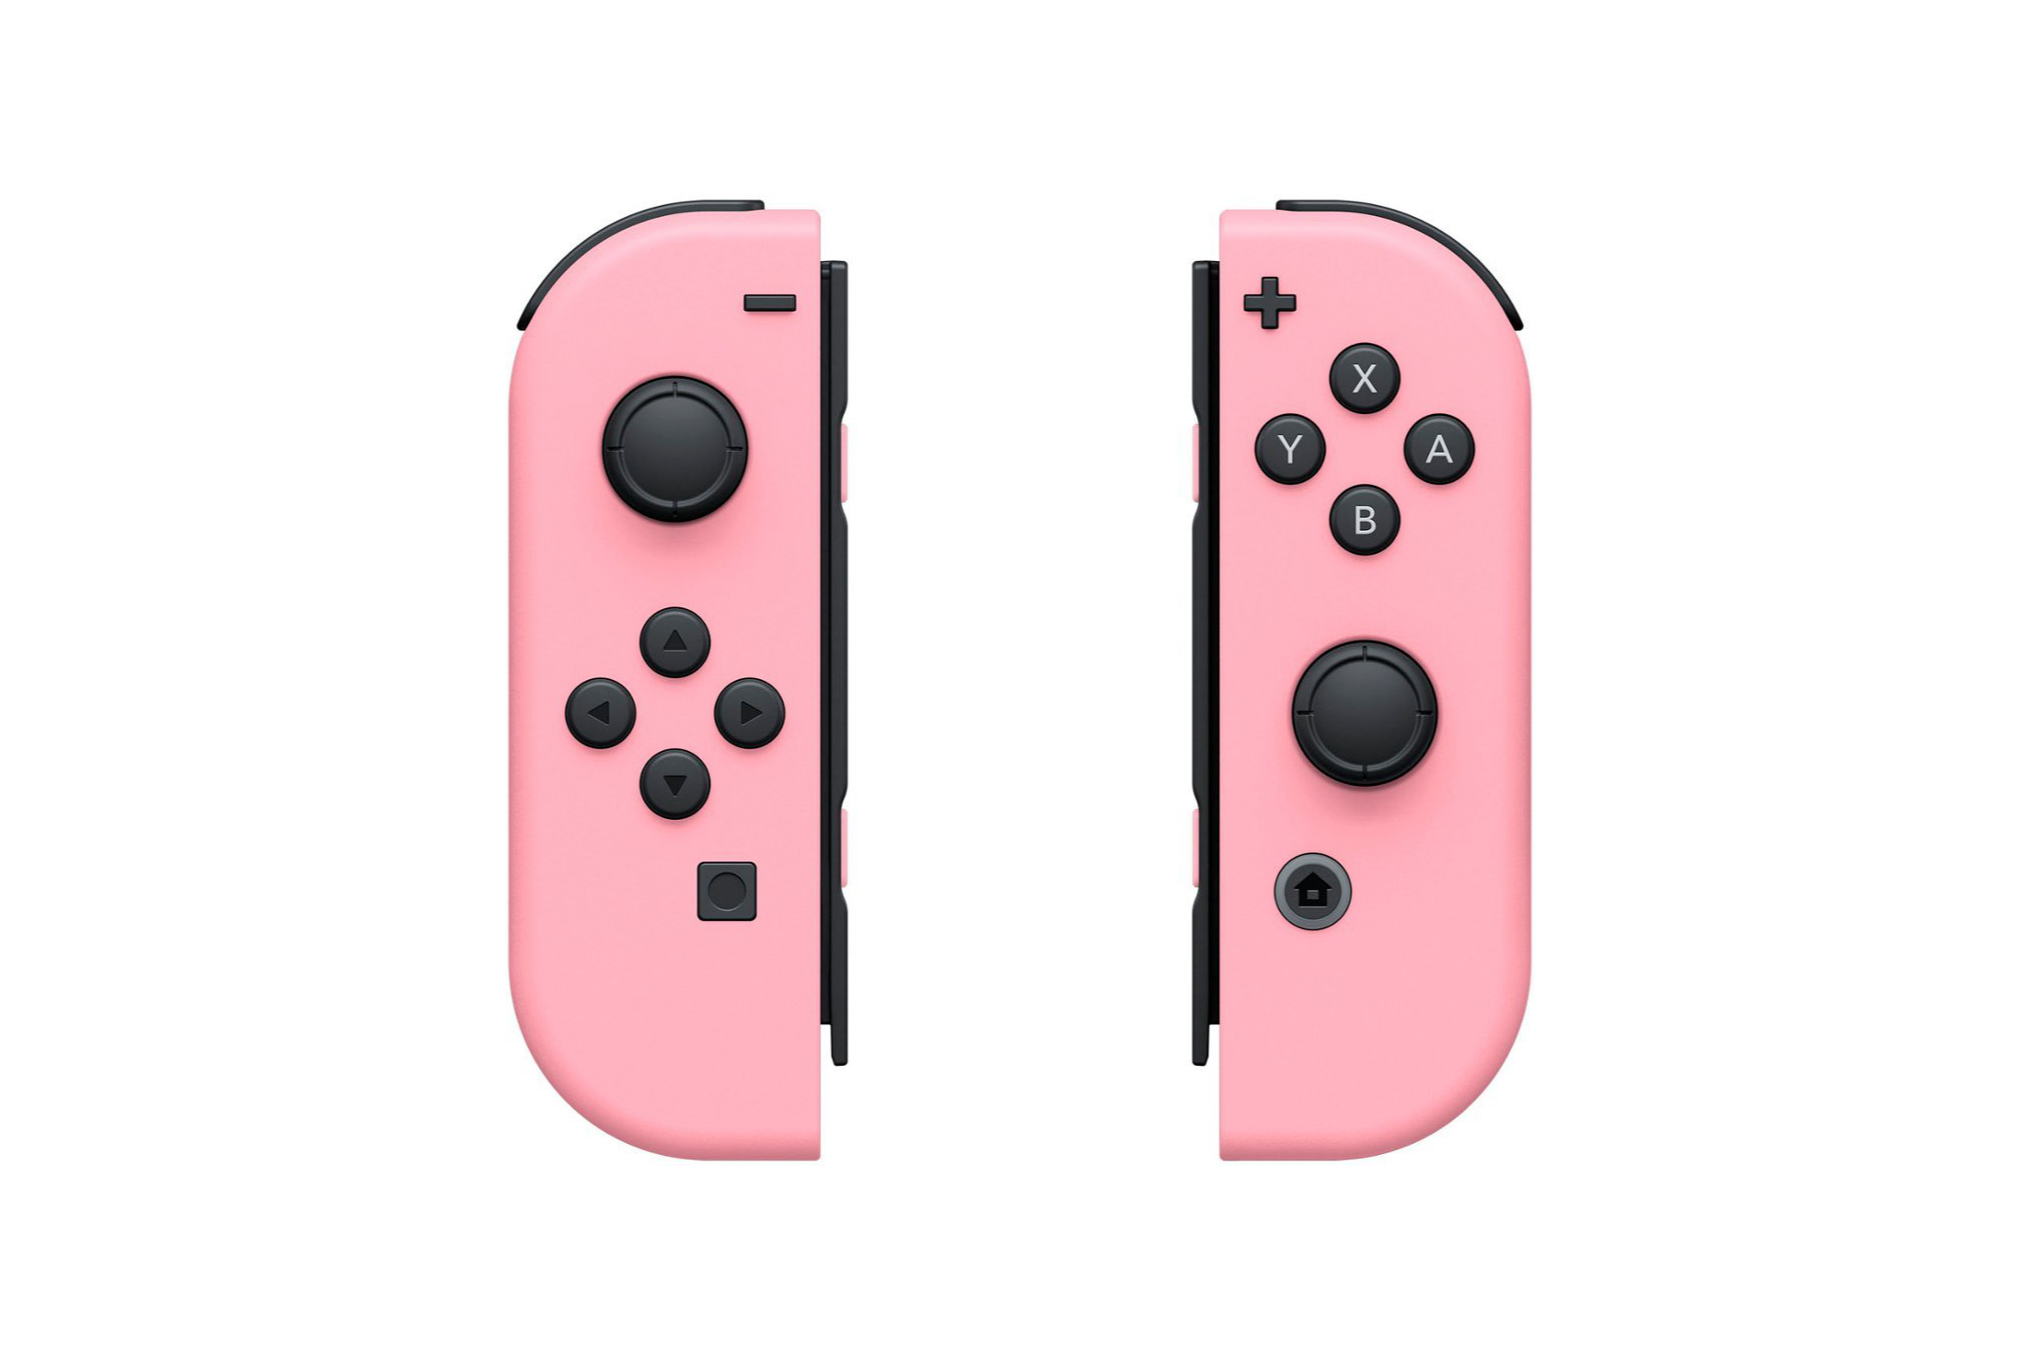 Nintendo’s pastel pink Joy-Cons are now available to pre-order